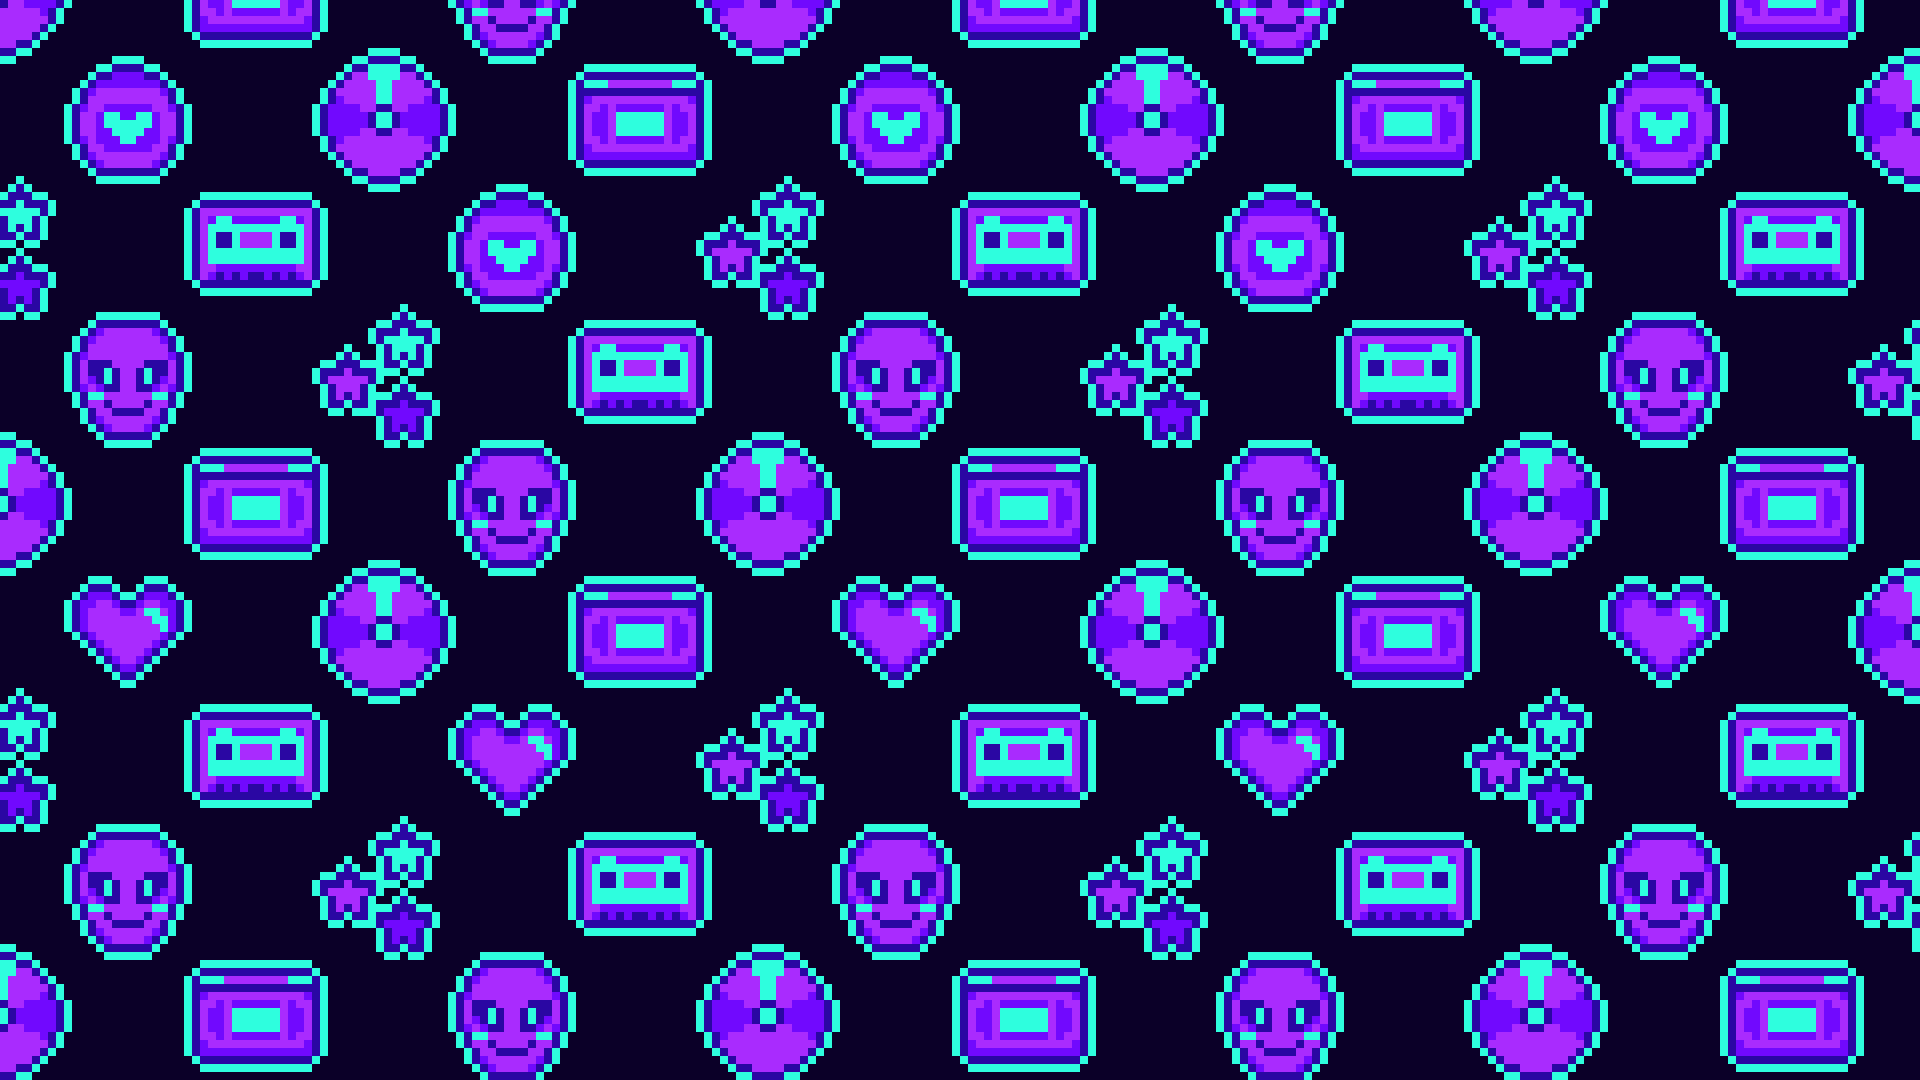 Y2K Neon Cyber Pixel Art Mobile and Desktop Wallpaper - SodorArt's Ko-fi  Shop - Ko-fi ❤️ Where creators get support from fans through donations,  memberships, shop sales and more! The original 'Buy